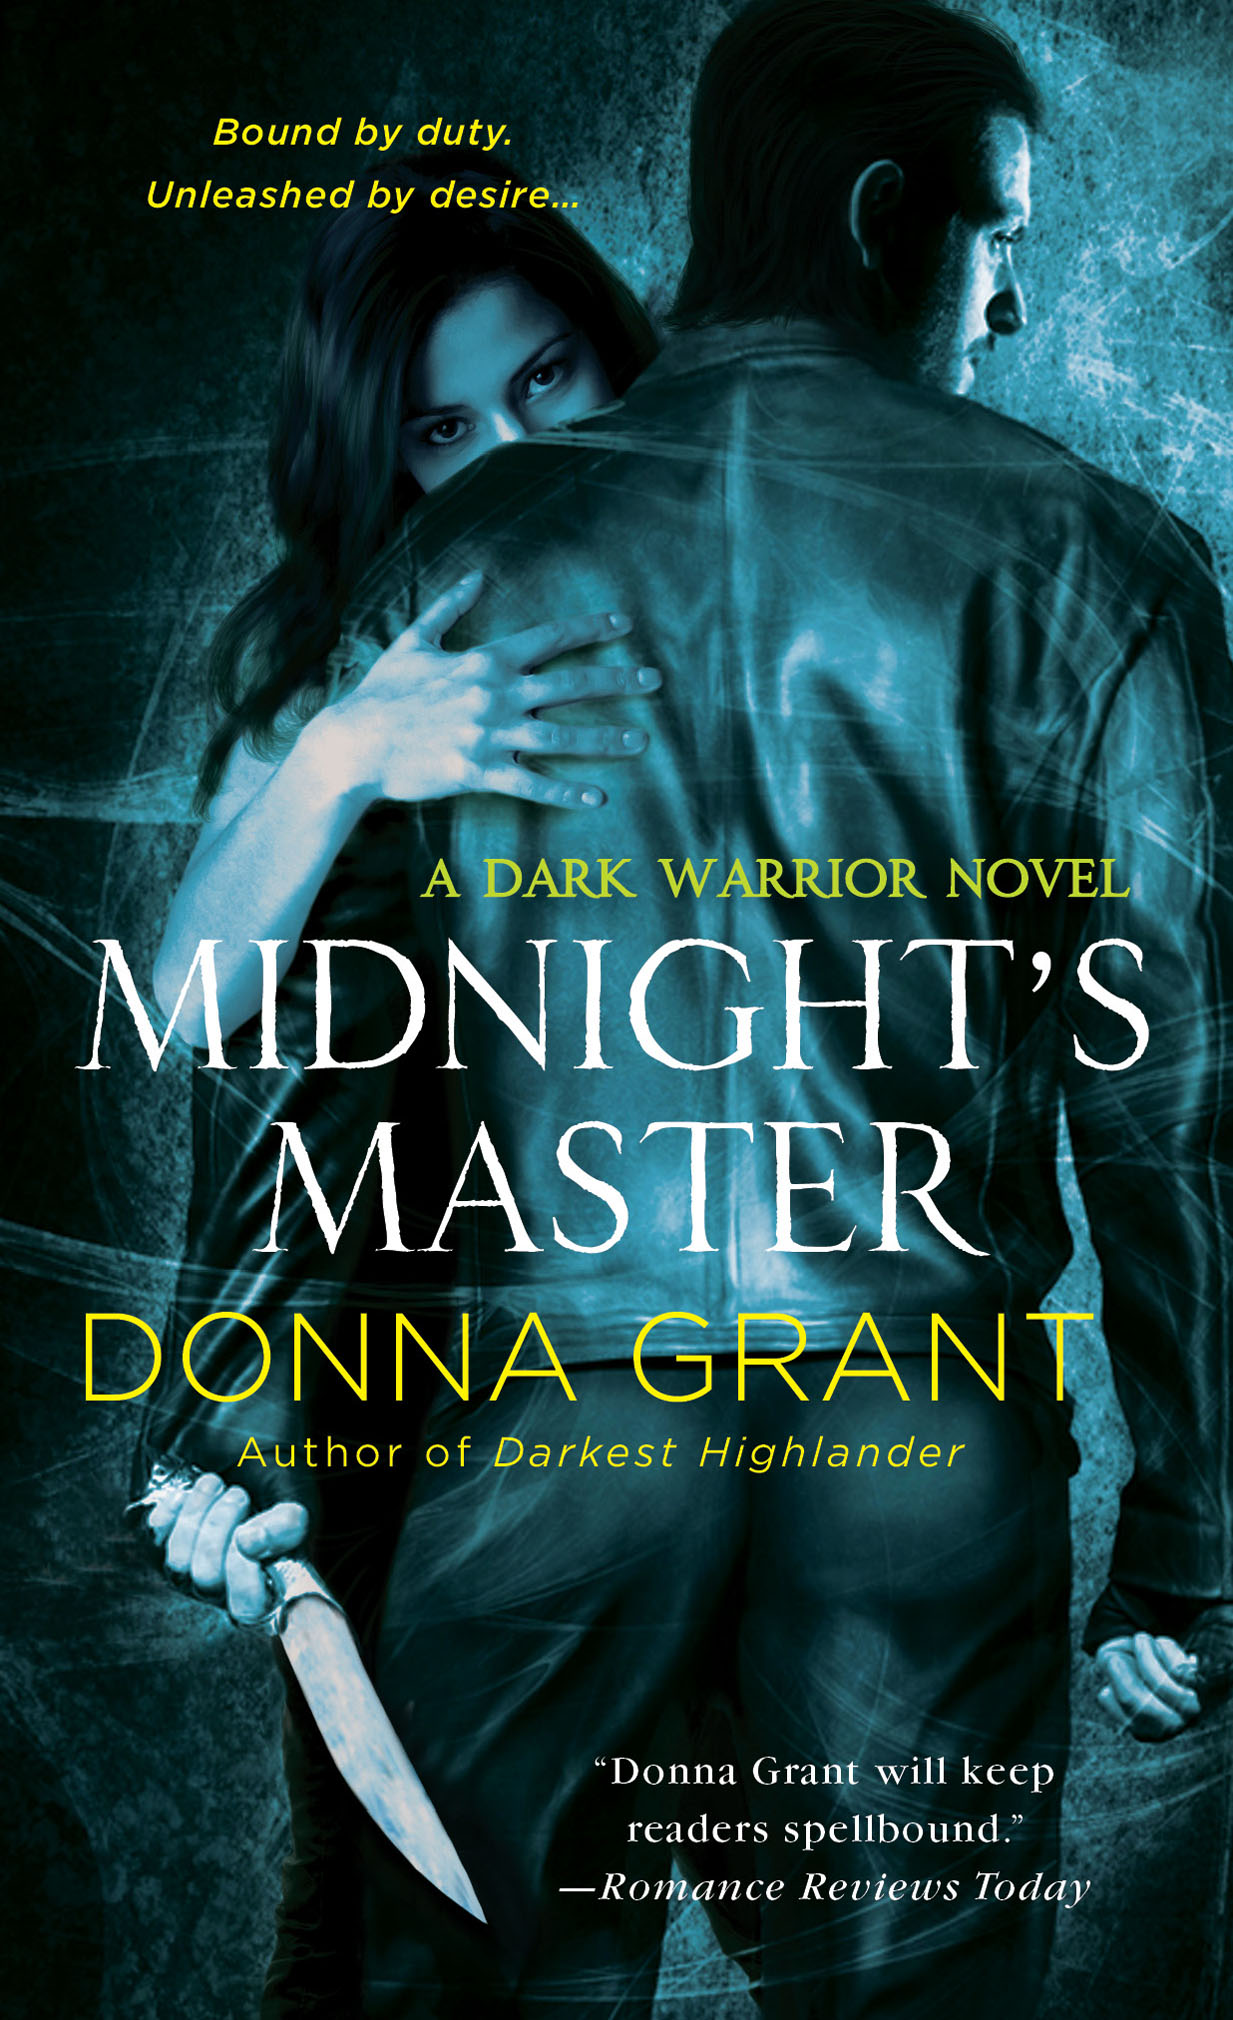 Donna Grant - Here's an updated reading order for the Dark World (Dark  Sword, Dark Warriors, Dark Kings, and Reaper series). And though they're  not all on the graphic, I just agreed